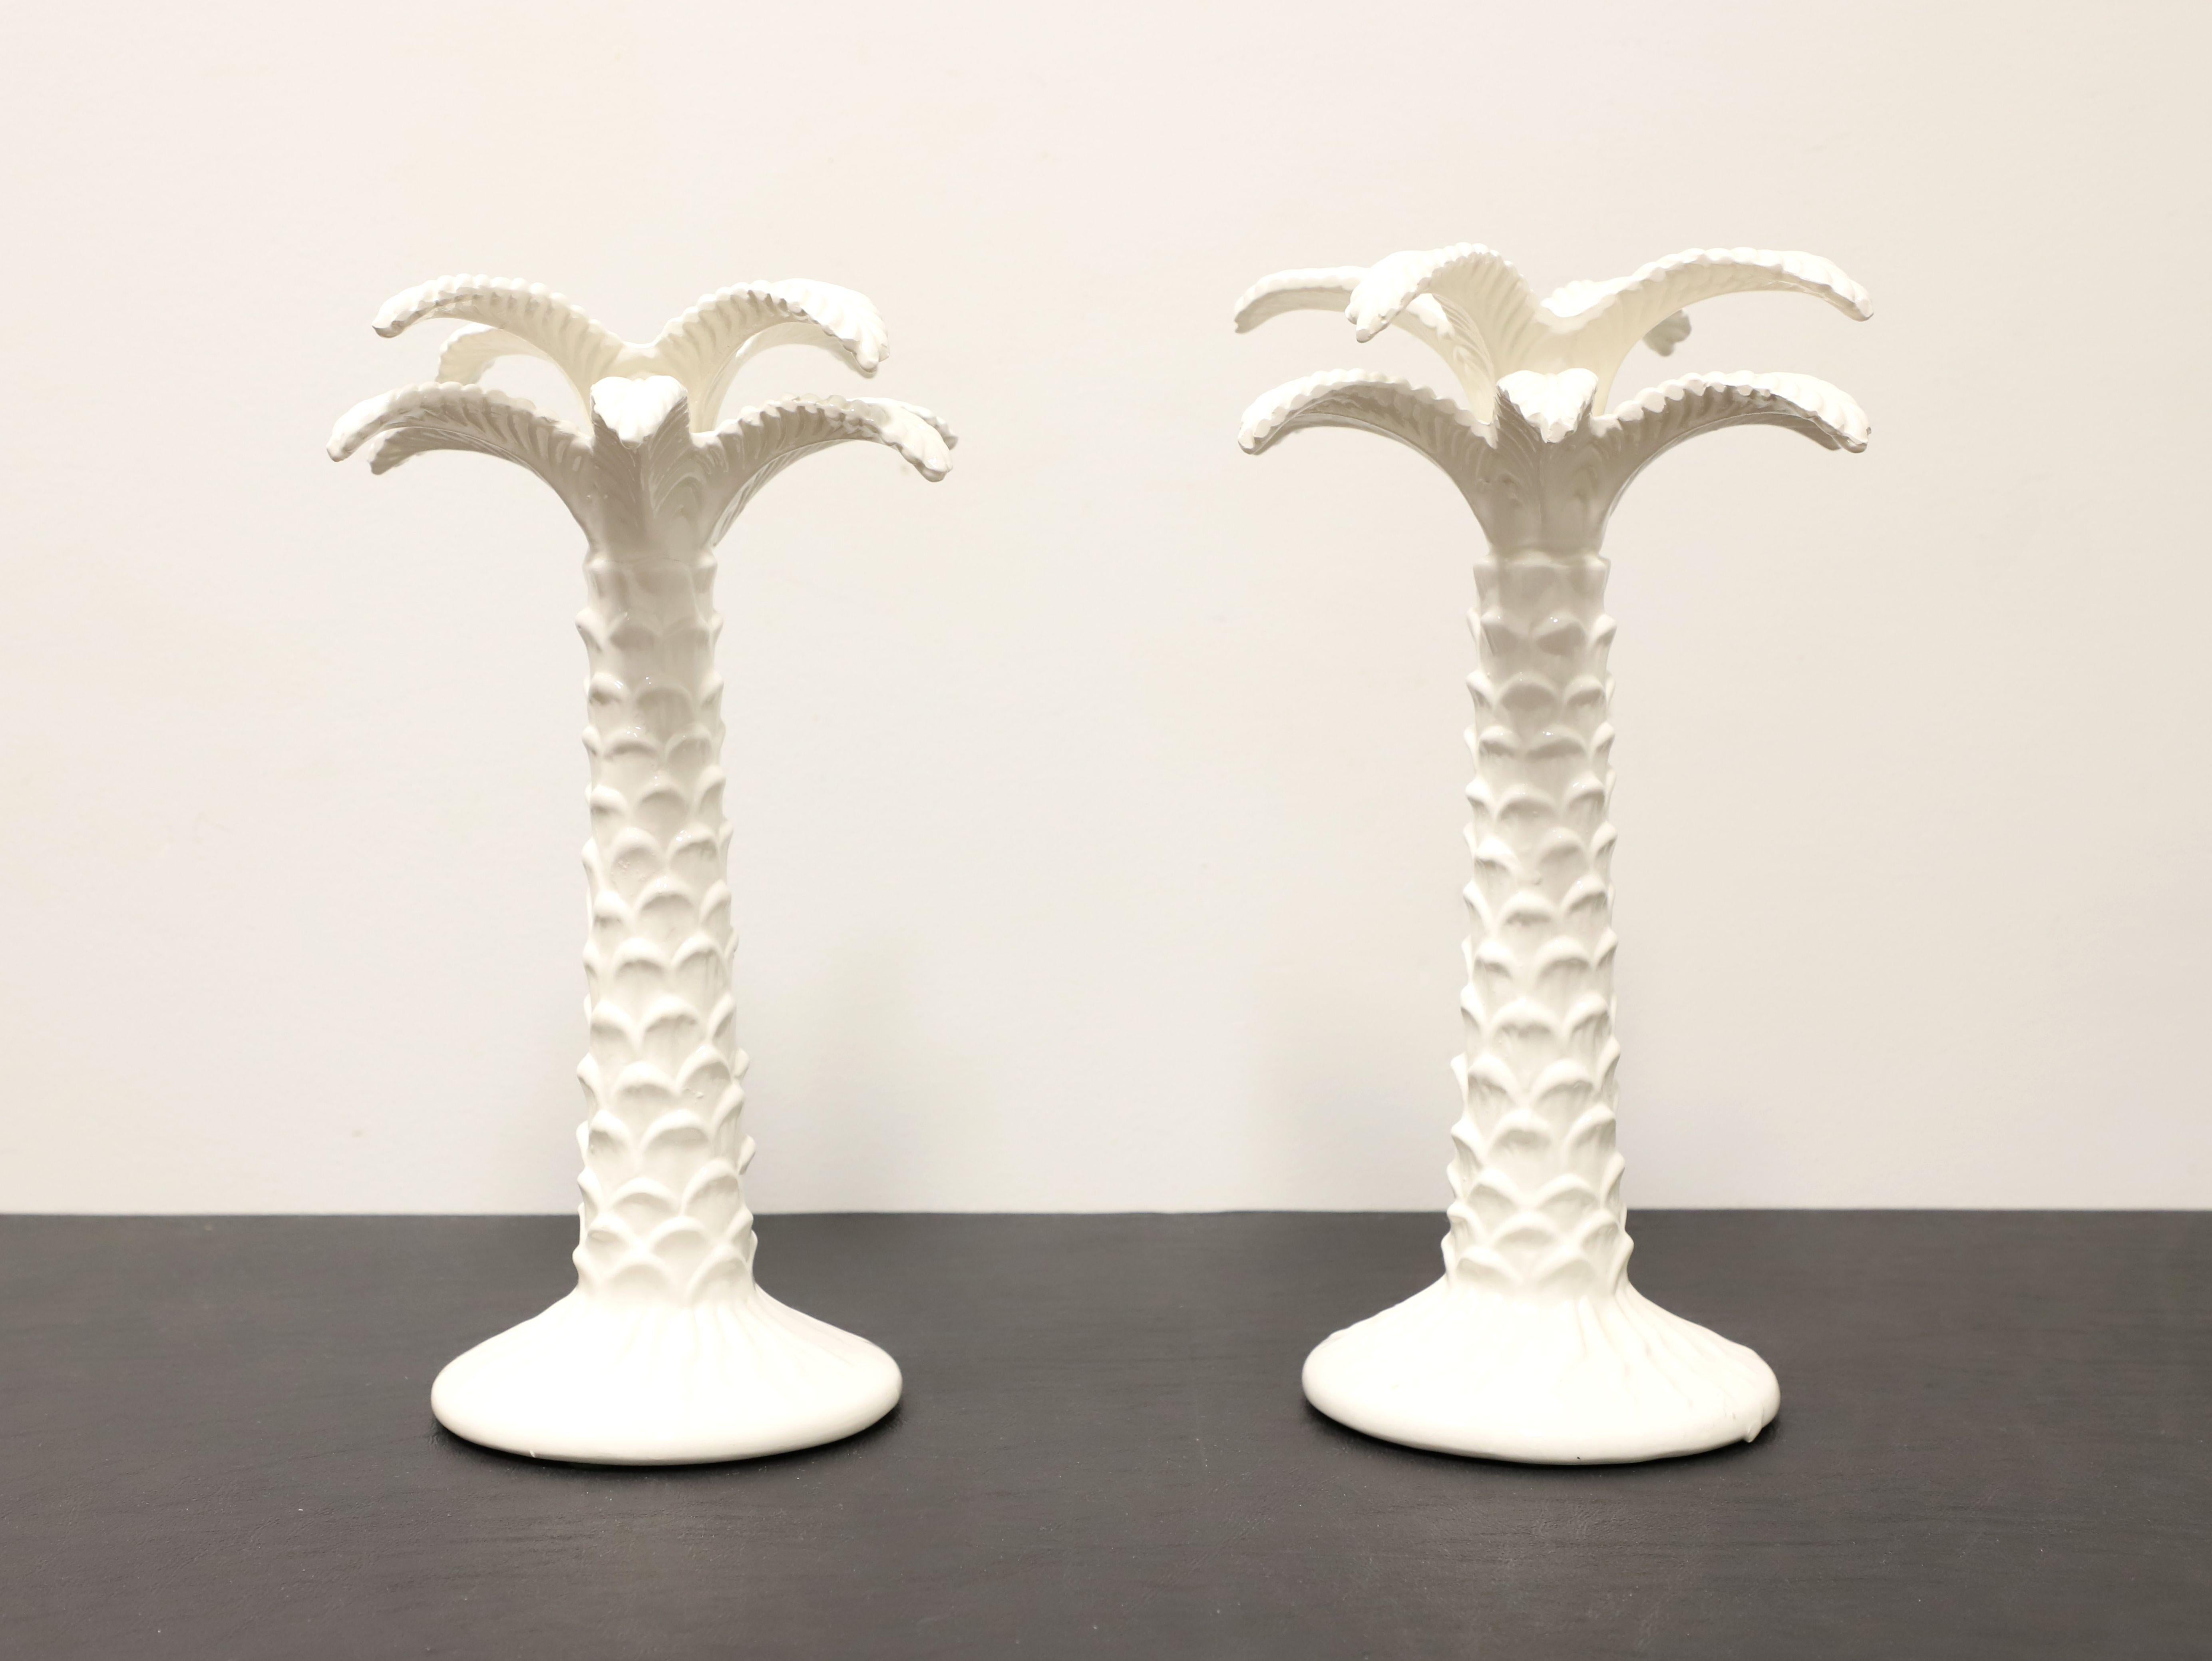 A pair of Italian candlesticks in the shape of palm trees, unbranded. Tall, white color porcelain and glazed. Unsigned, artist unknown. Made in Italy, in the Mid 20th Century. 

Measures:  7.5w 7.5d 12.25h, Weighs: 2 lbs Each

Excellent vintage